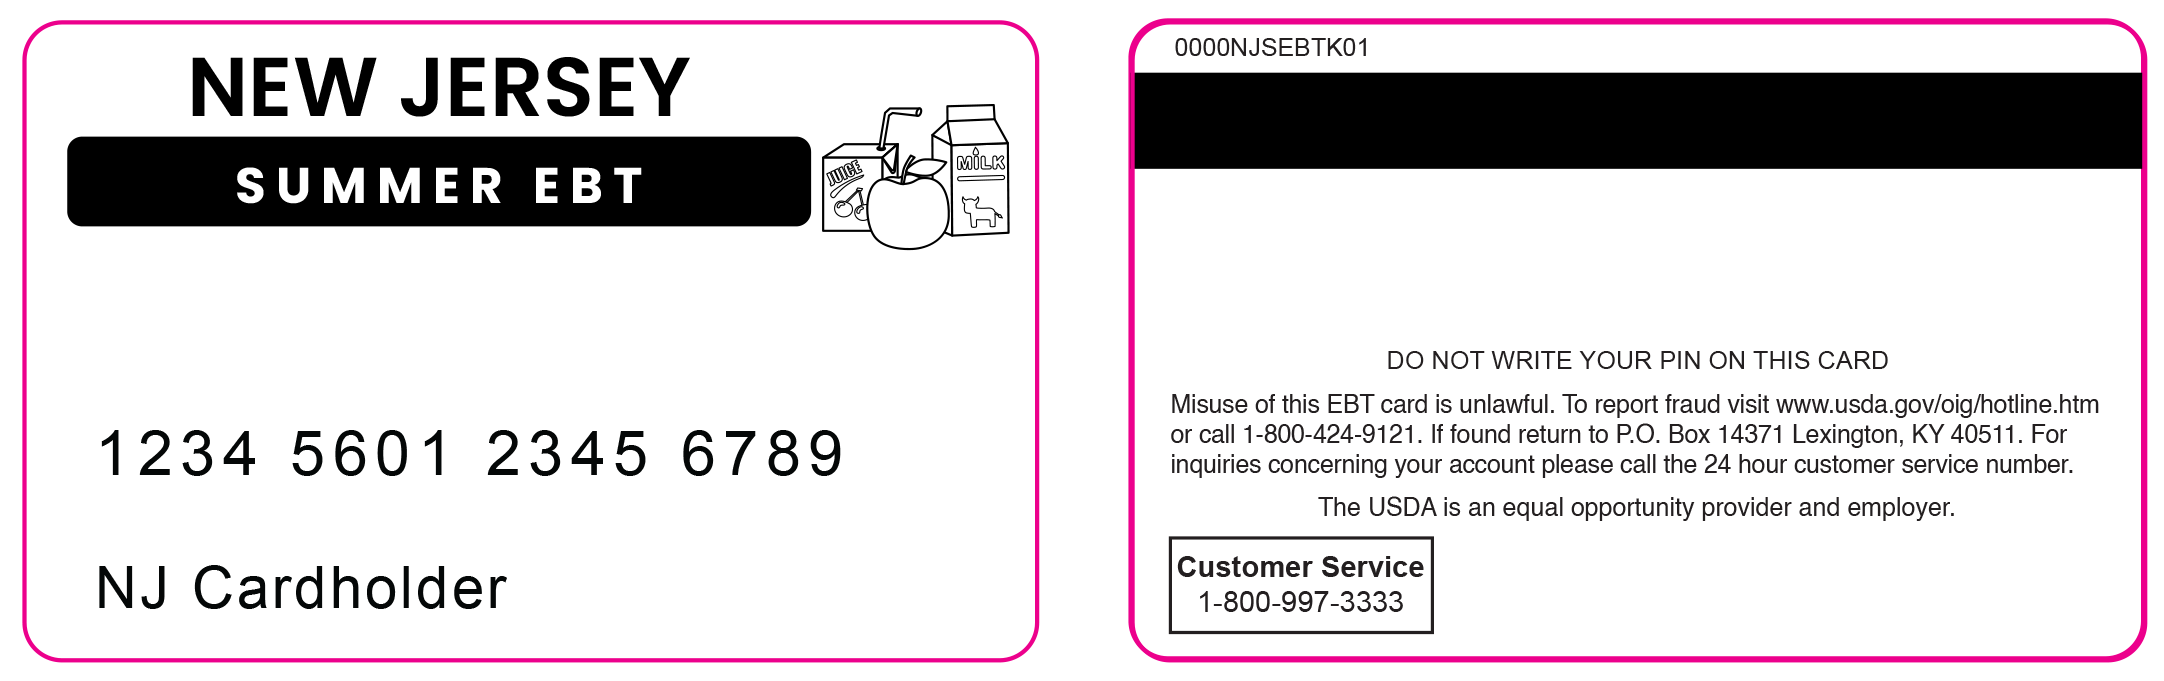 Image of front and back of an example EBT card